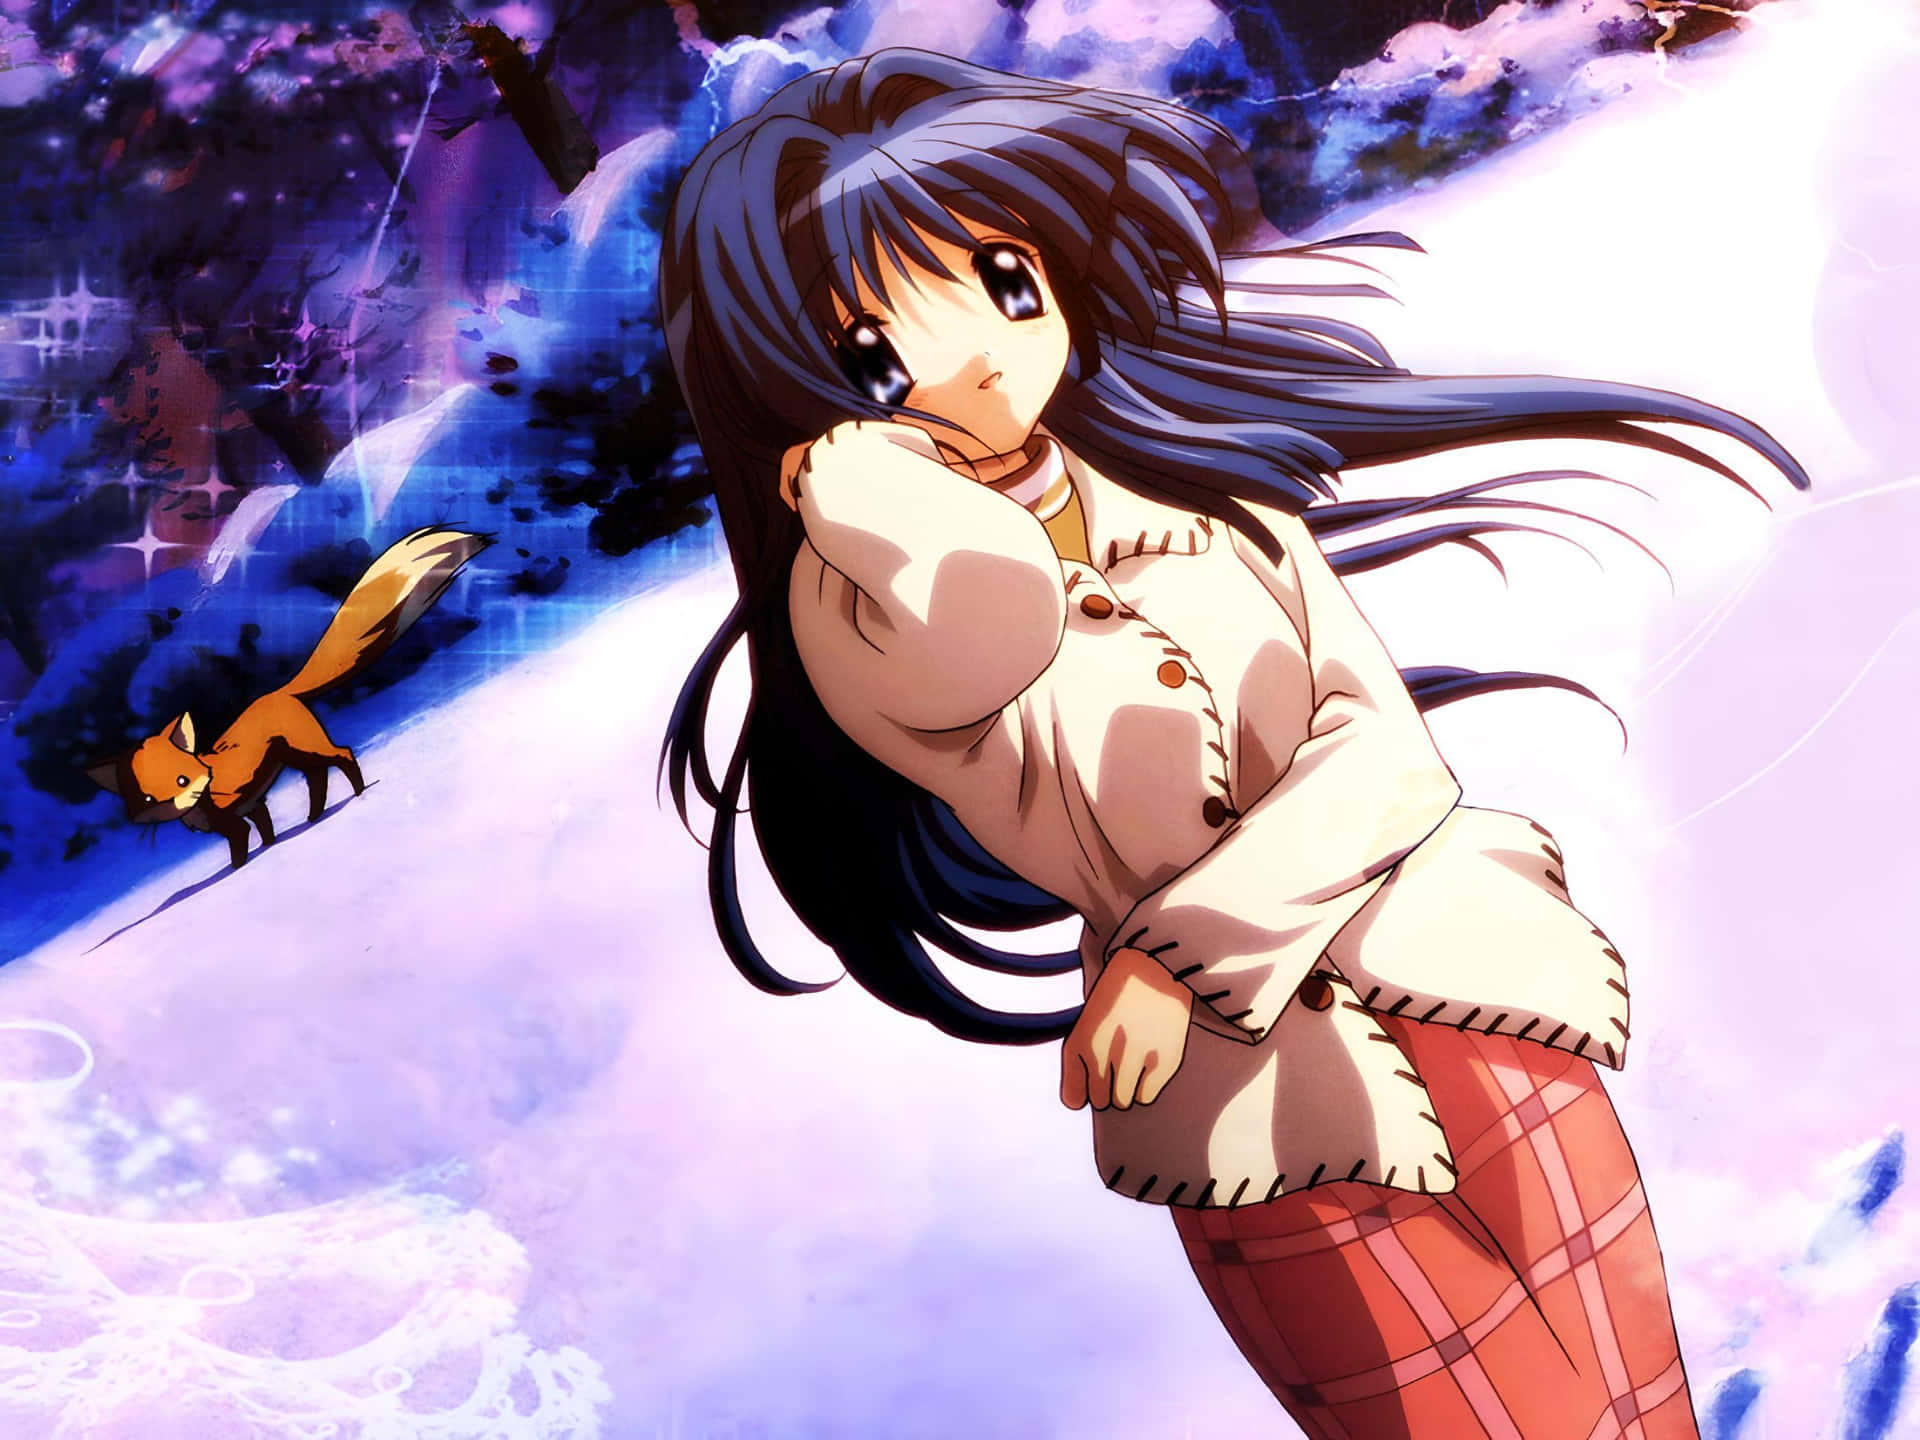 Nayuki Minase From Kanon Visual Novel Game Poses Against A Snowy Background. Wallpaper